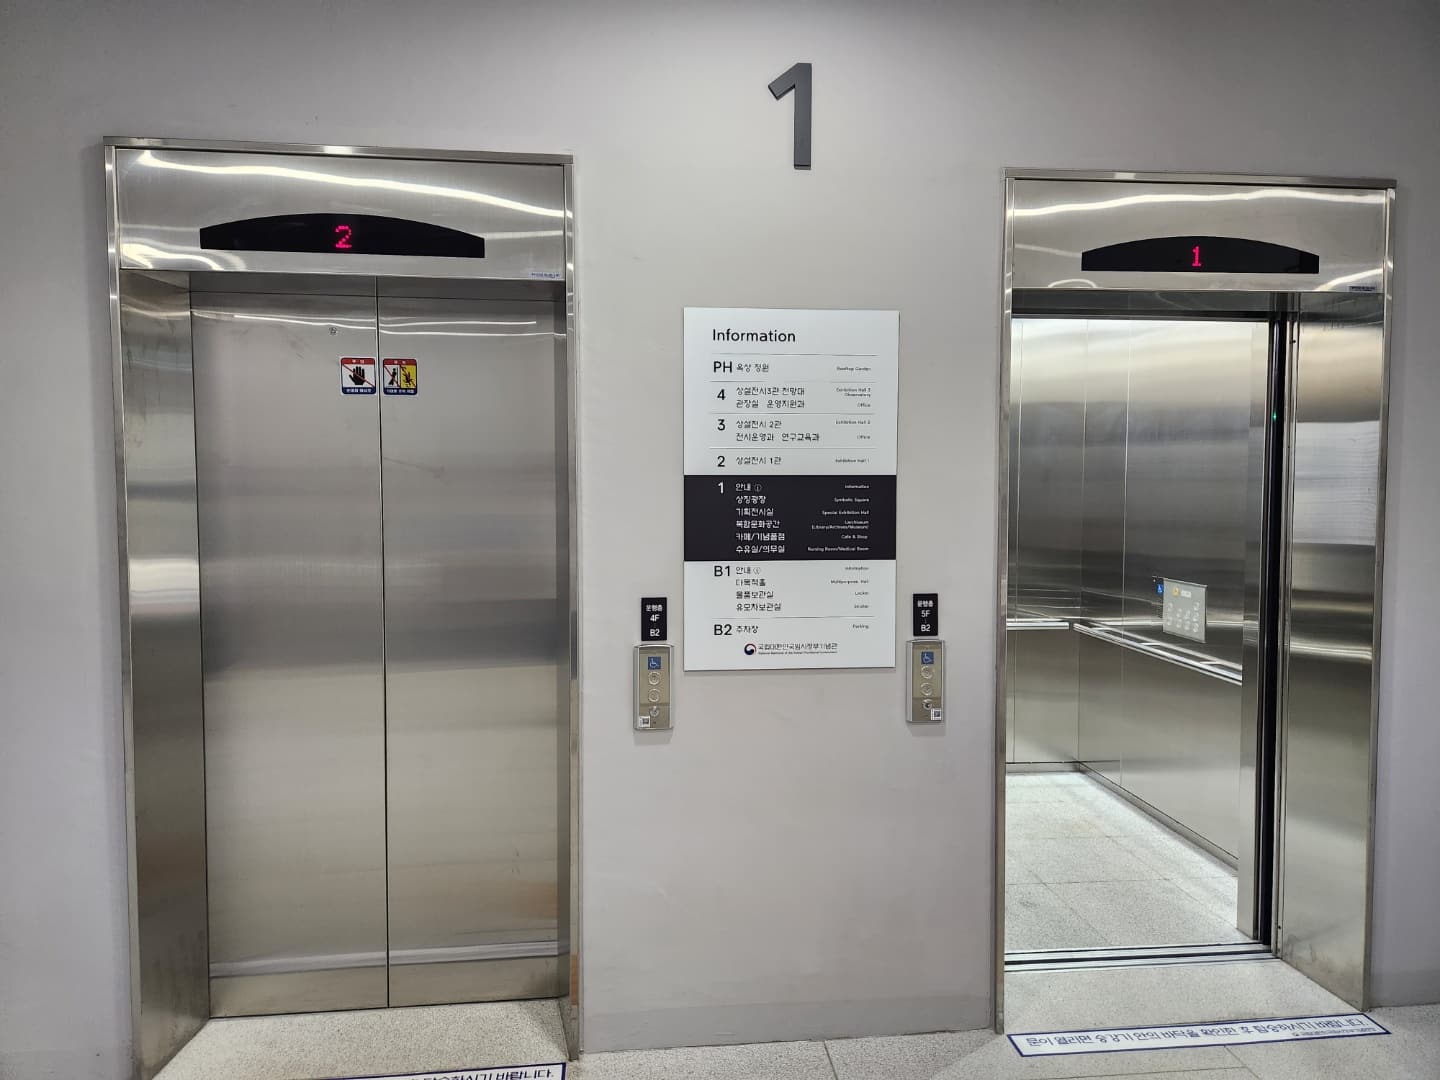 Elevator0 : Two elevators in a row